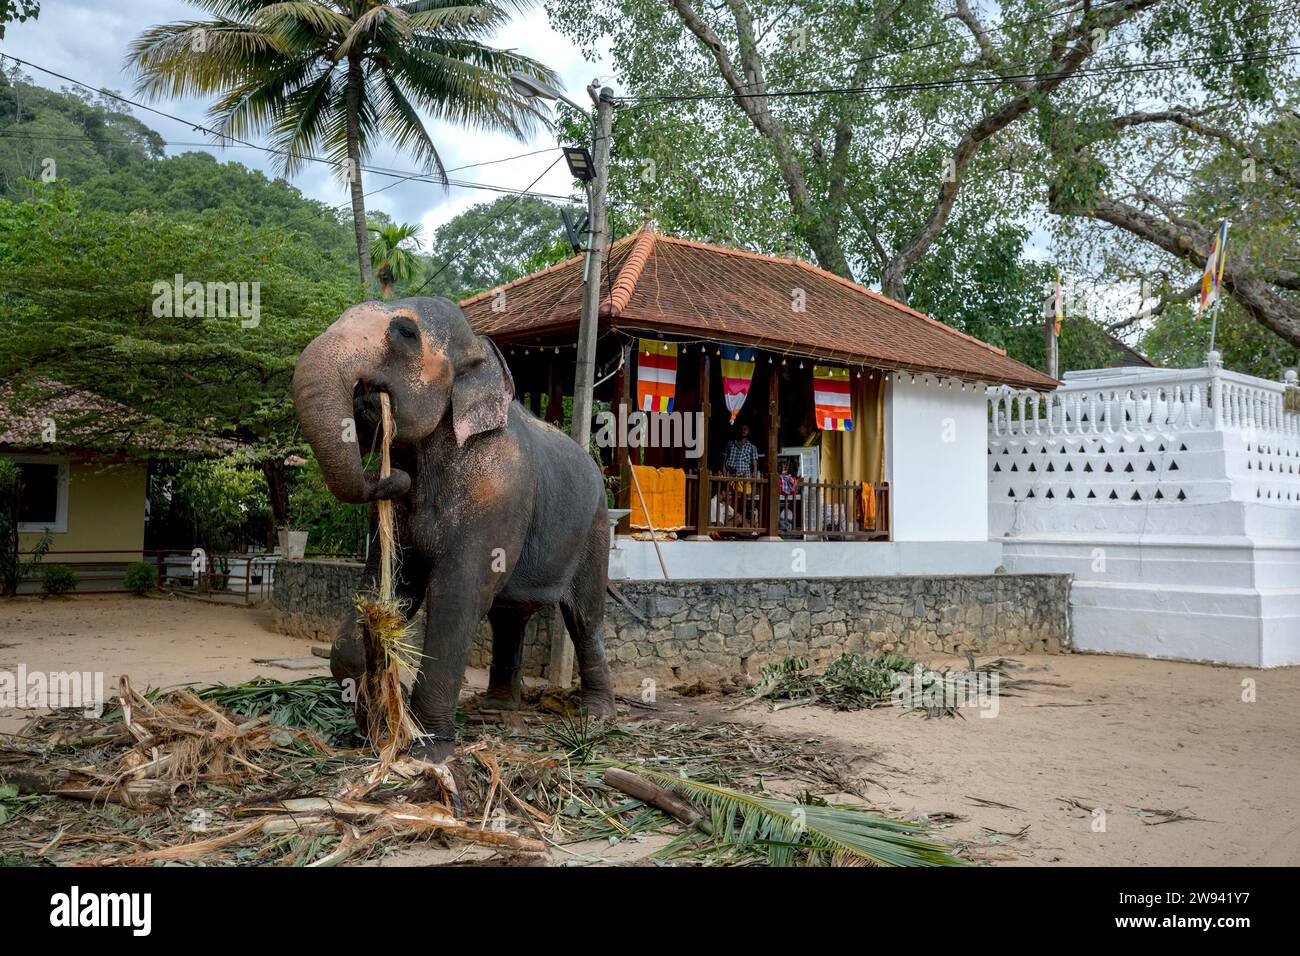 KANDY, SRI LANKA - AUGUST 28, 2023 : A ceremonial elephant feeds on palm leaves within the Temple of the Sacred Tooth Relic complex at Kandy in Sri La Stock Photo